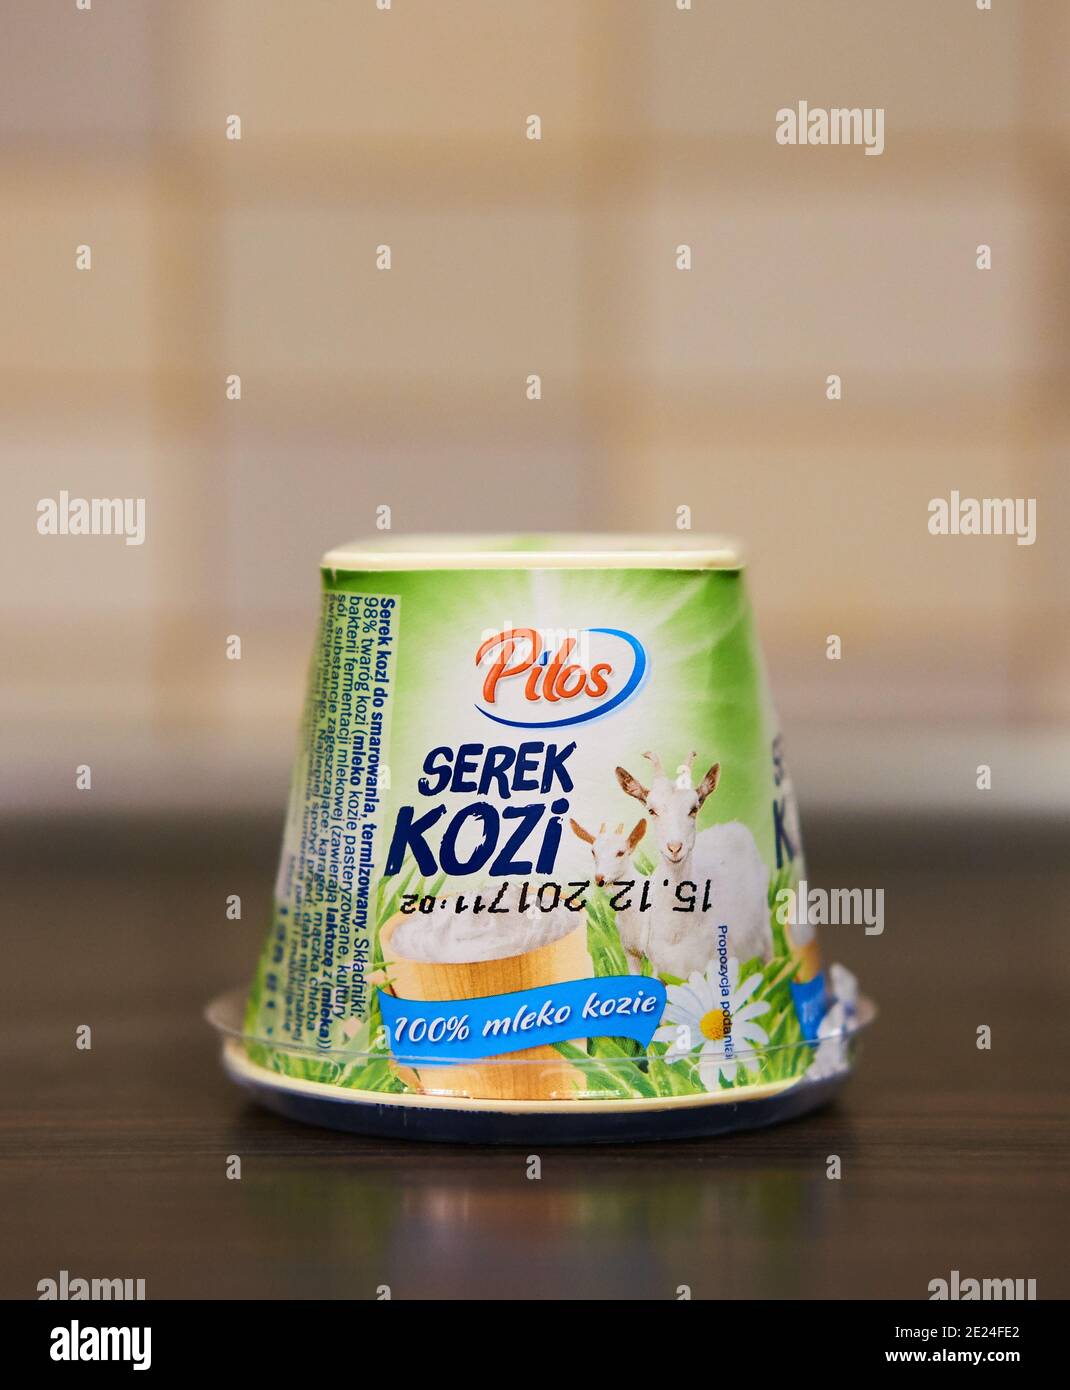 POZNAN, POLAND - Pilos Stock wooden on table 06, cheese Oct Alamy a brand Lidl 2017: - Photo goat